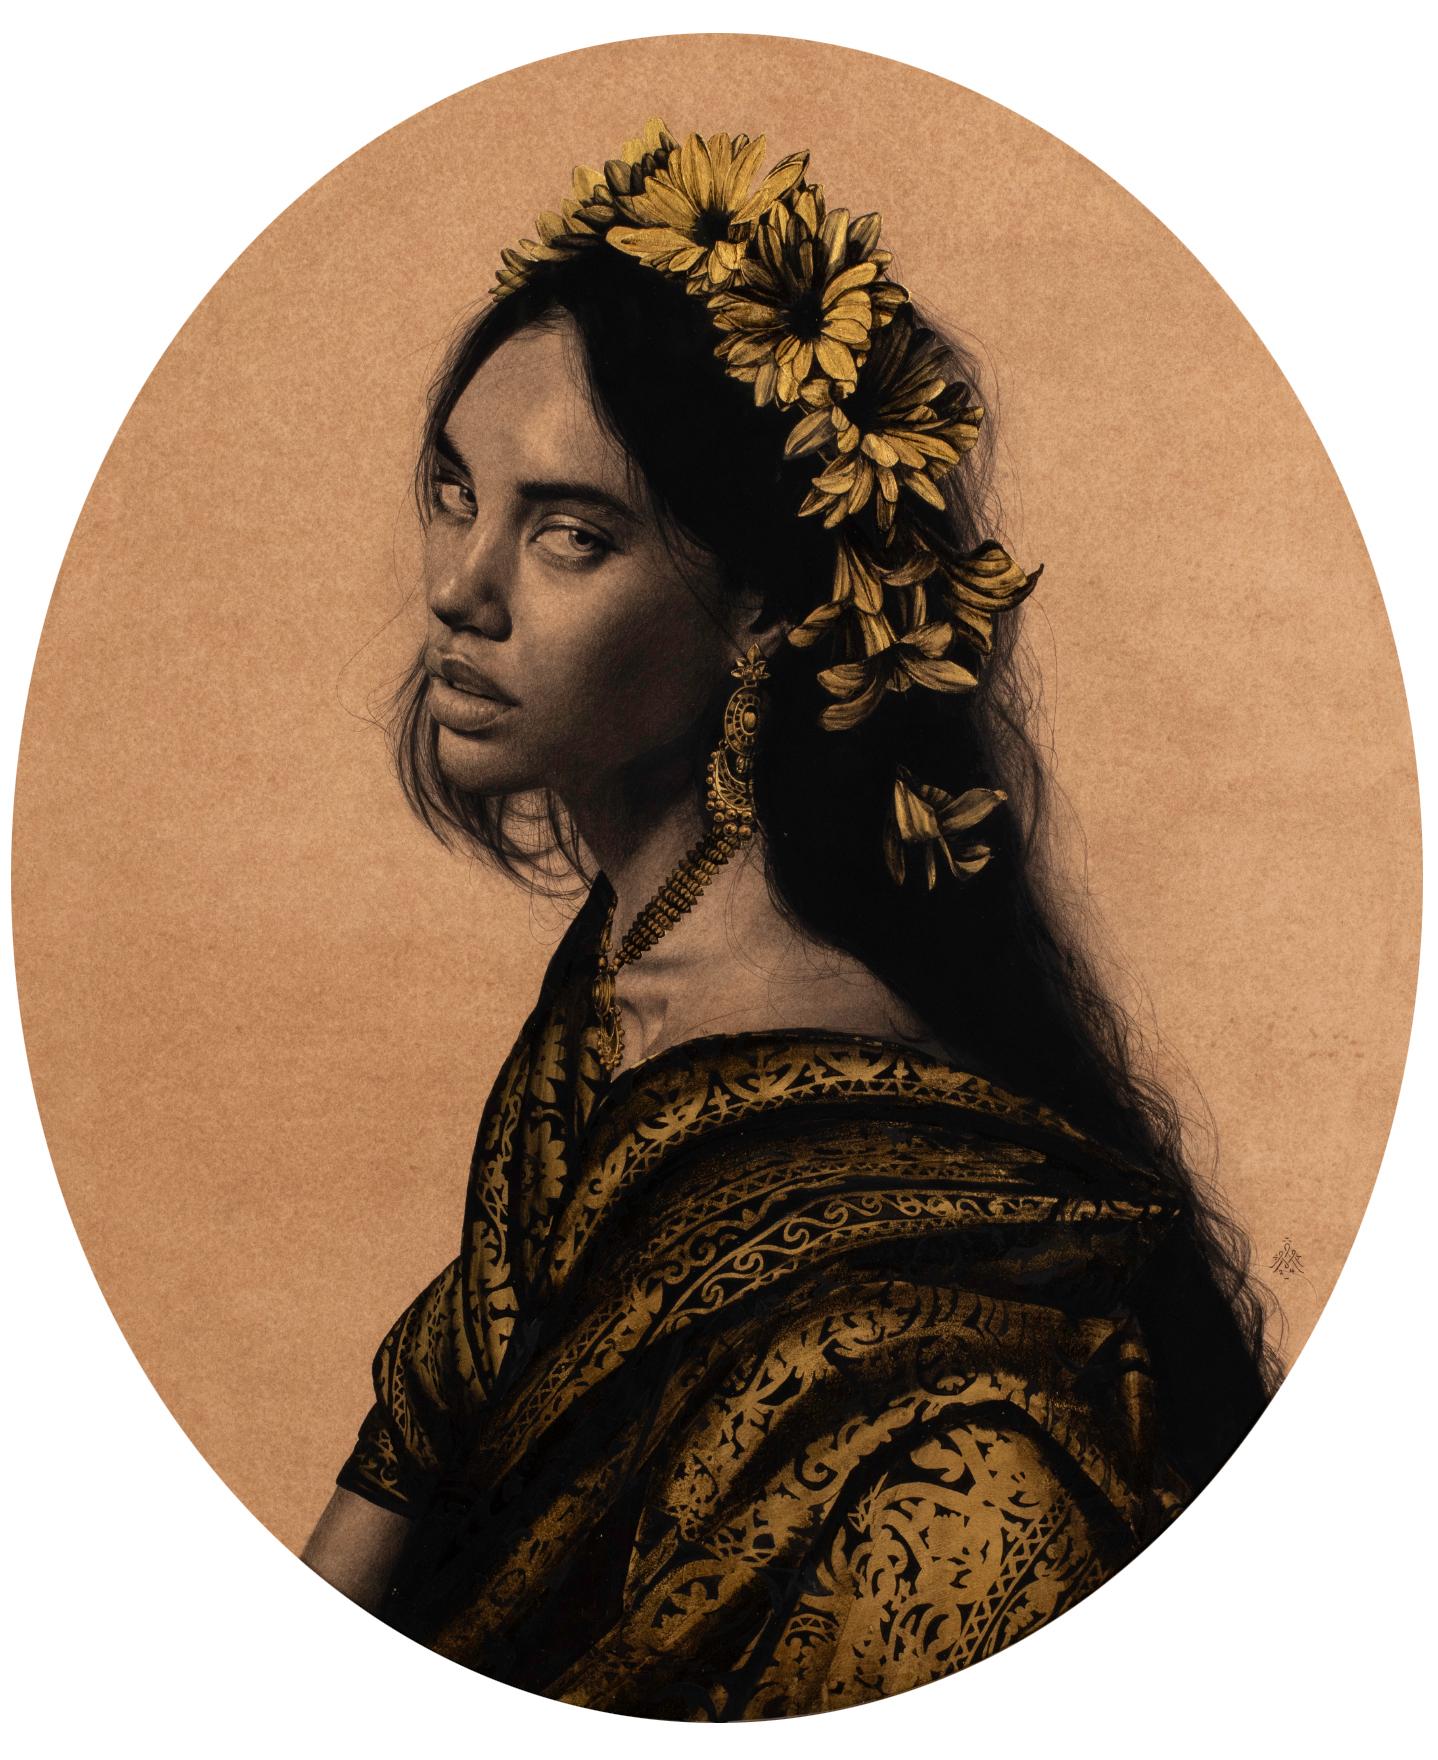 Working with a palette of graphite and gold leaf, Alessandra Maria masterfully weaves together elements of the earthly and ethereal. She is part sorceress, part alchemist, summoning present from past and transmuting myth into truth. Her subtle